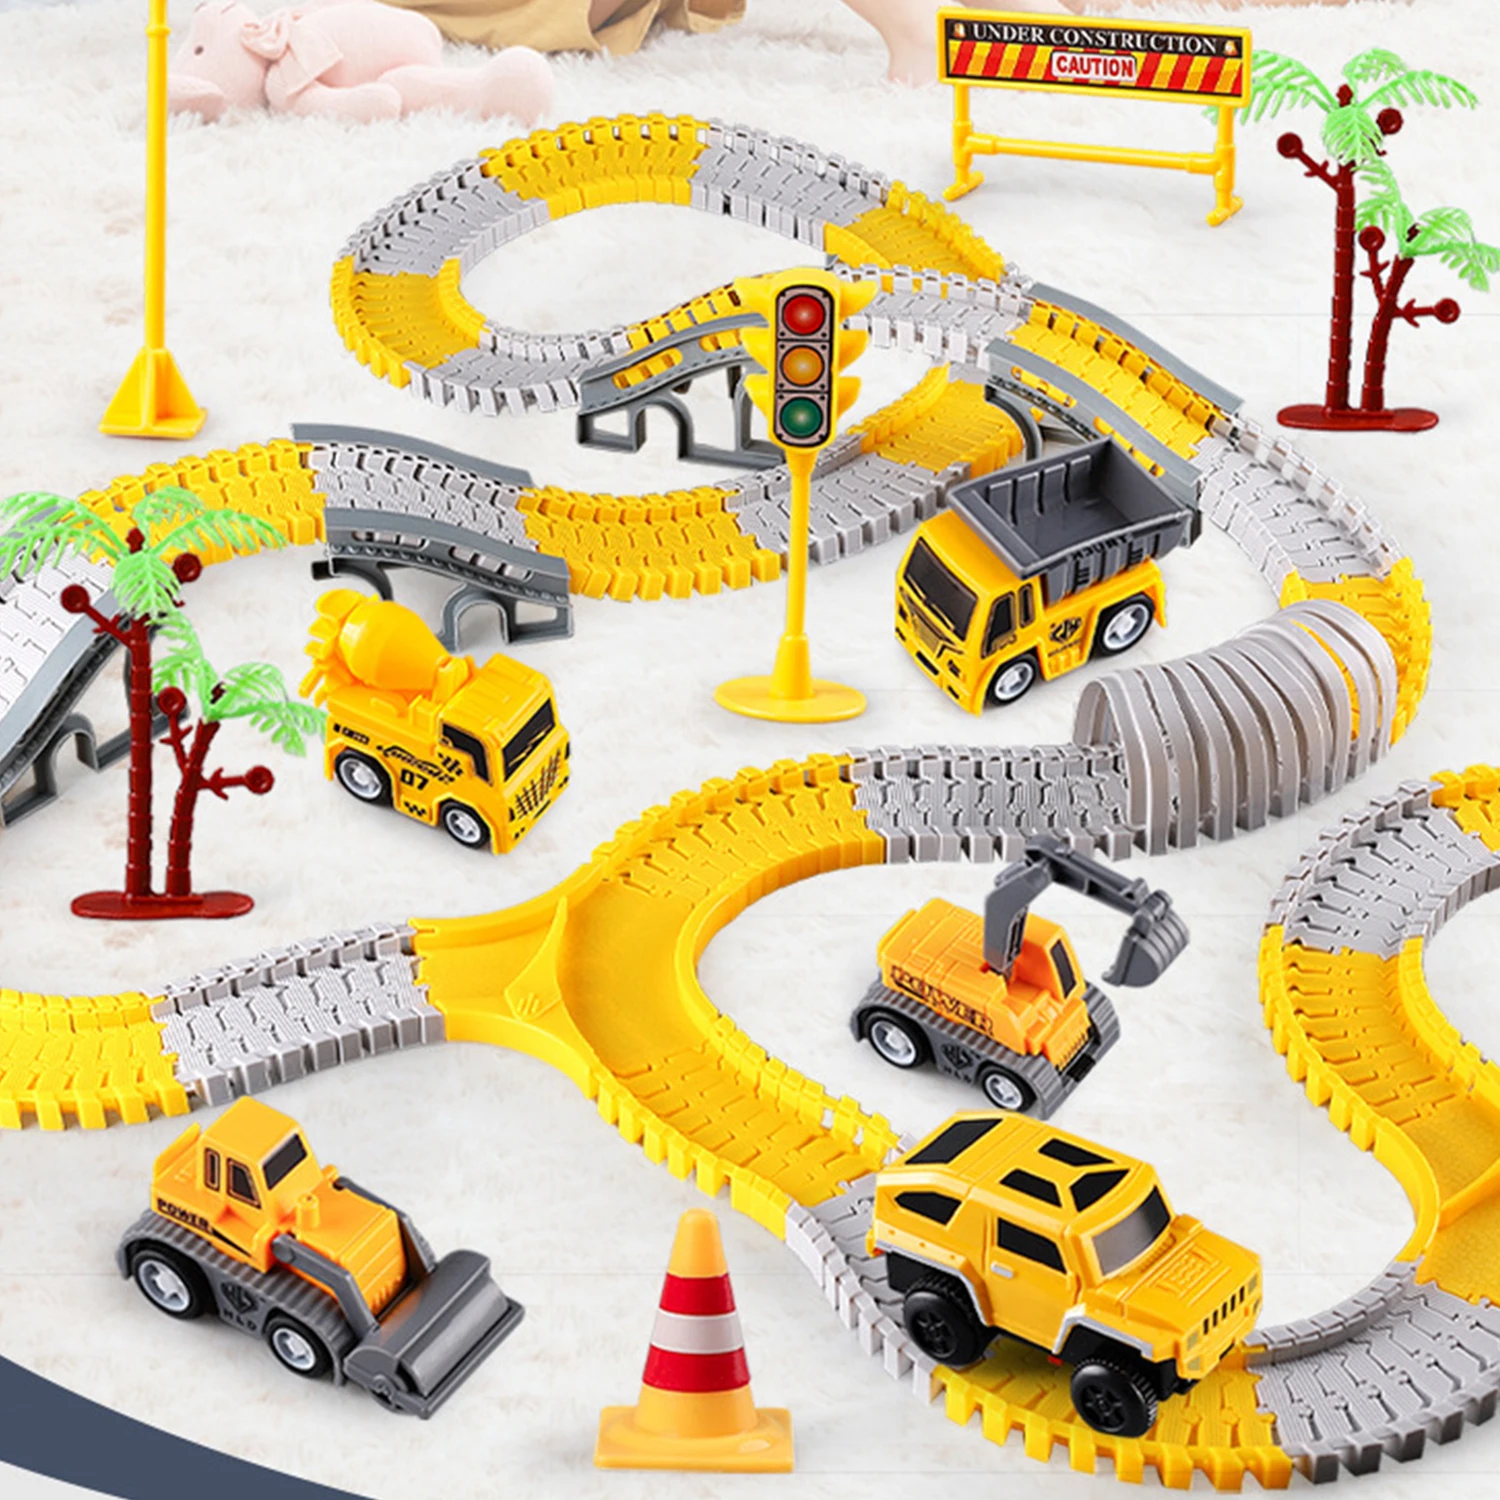 

Construction Toys Race Tracks for Boys Kids Toys Construction Car and Flexible Track Play Set Create A Engineering Road